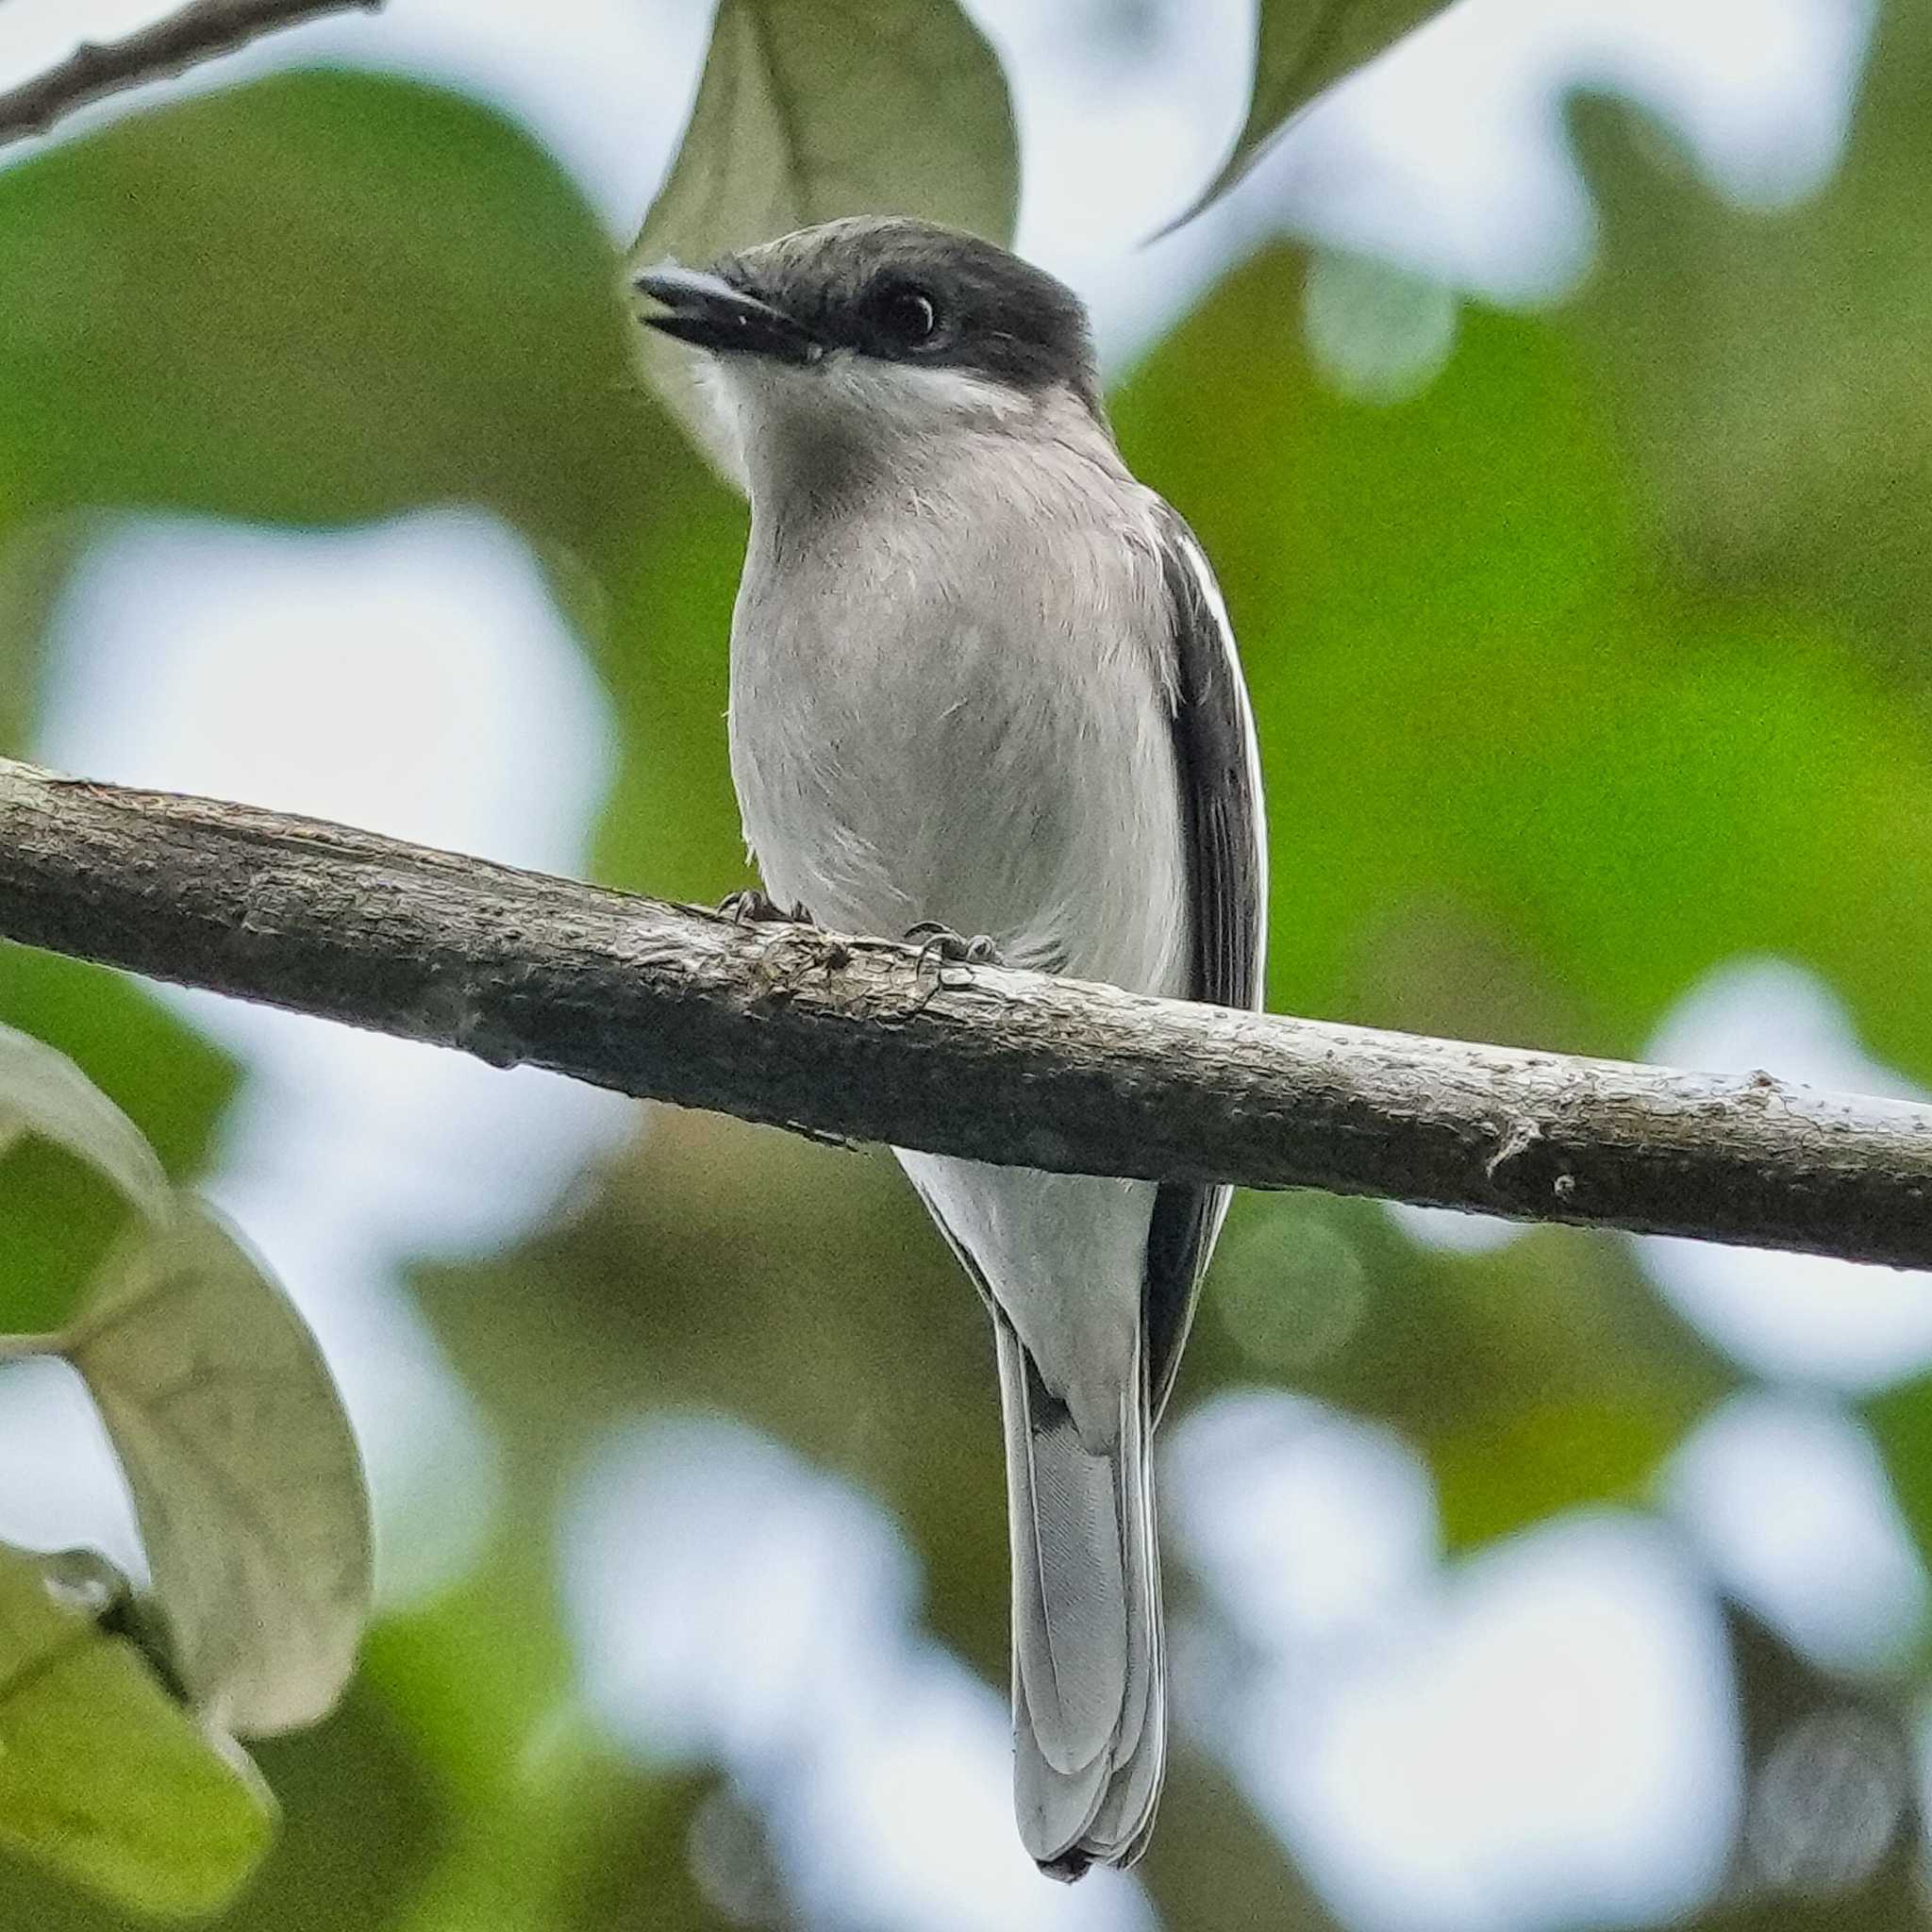 Photo of Bar-winged Flycatcher-shrike at Nam Nao National Park by span265